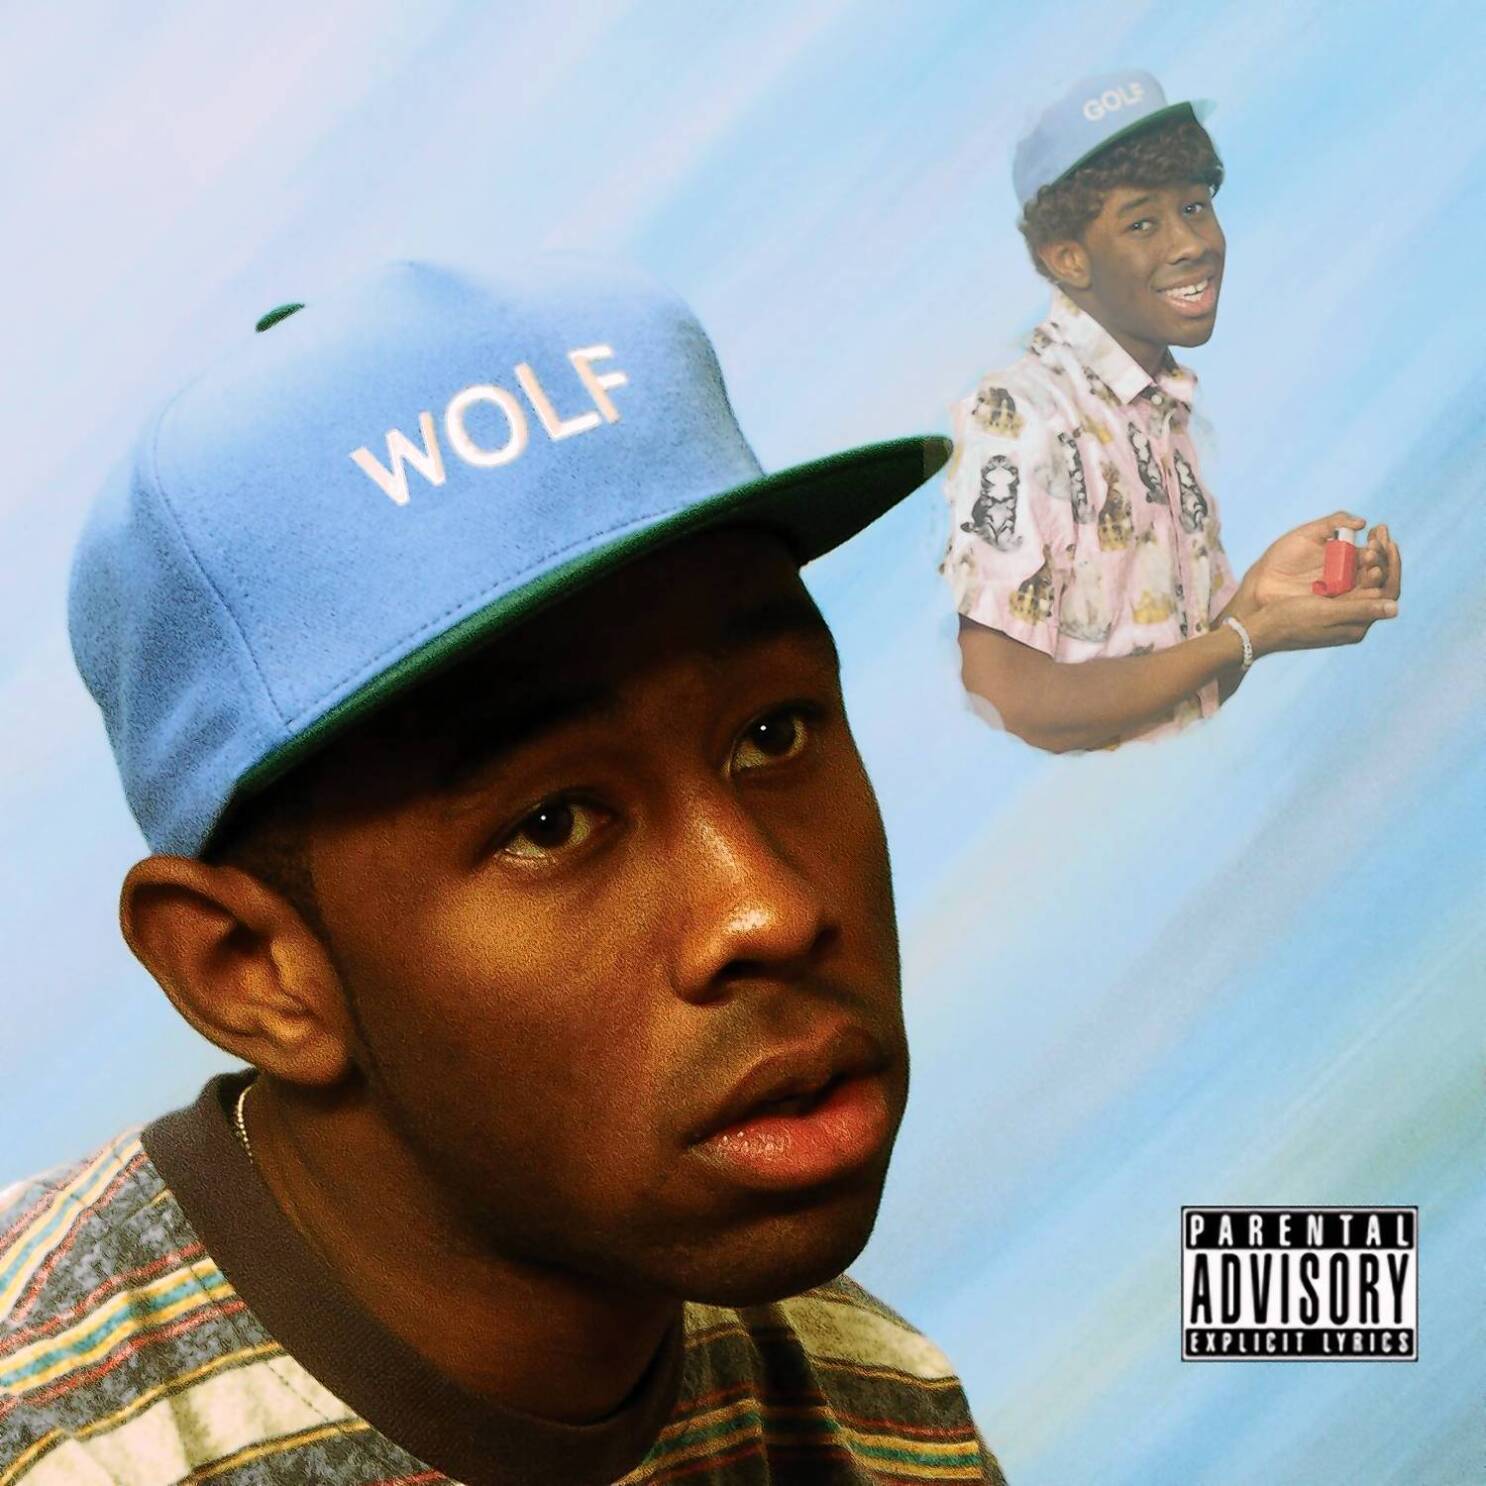 tyler the creator songs ranked